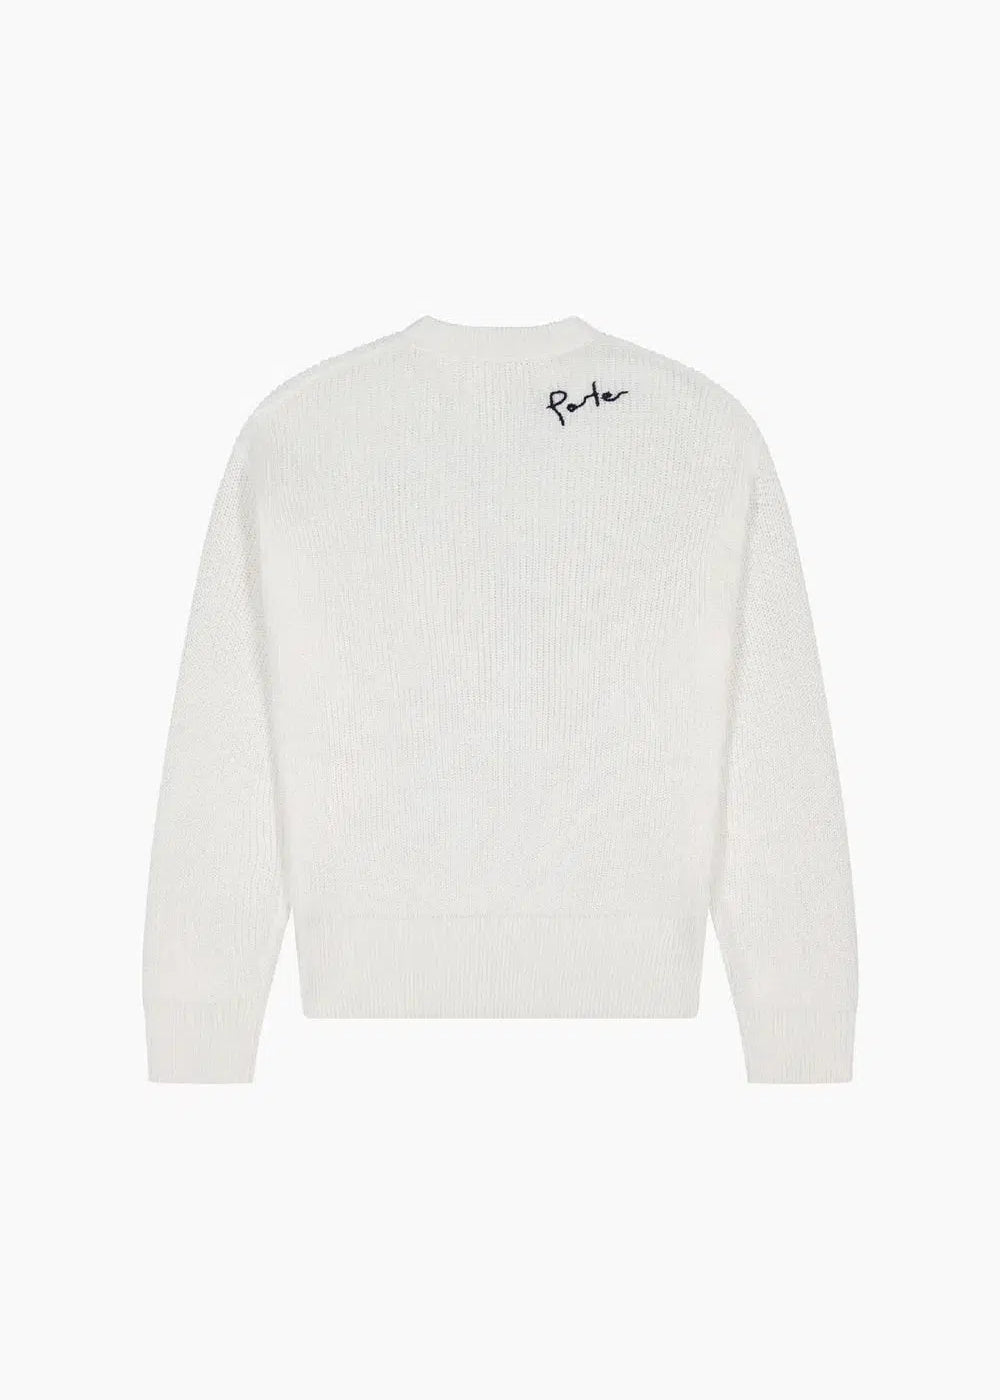 ORGANIC RIBBED KNIT OFF-WHITE + NAVY HAND-STITCH | PORTER JAMES SPORTS | Mad About The Boy